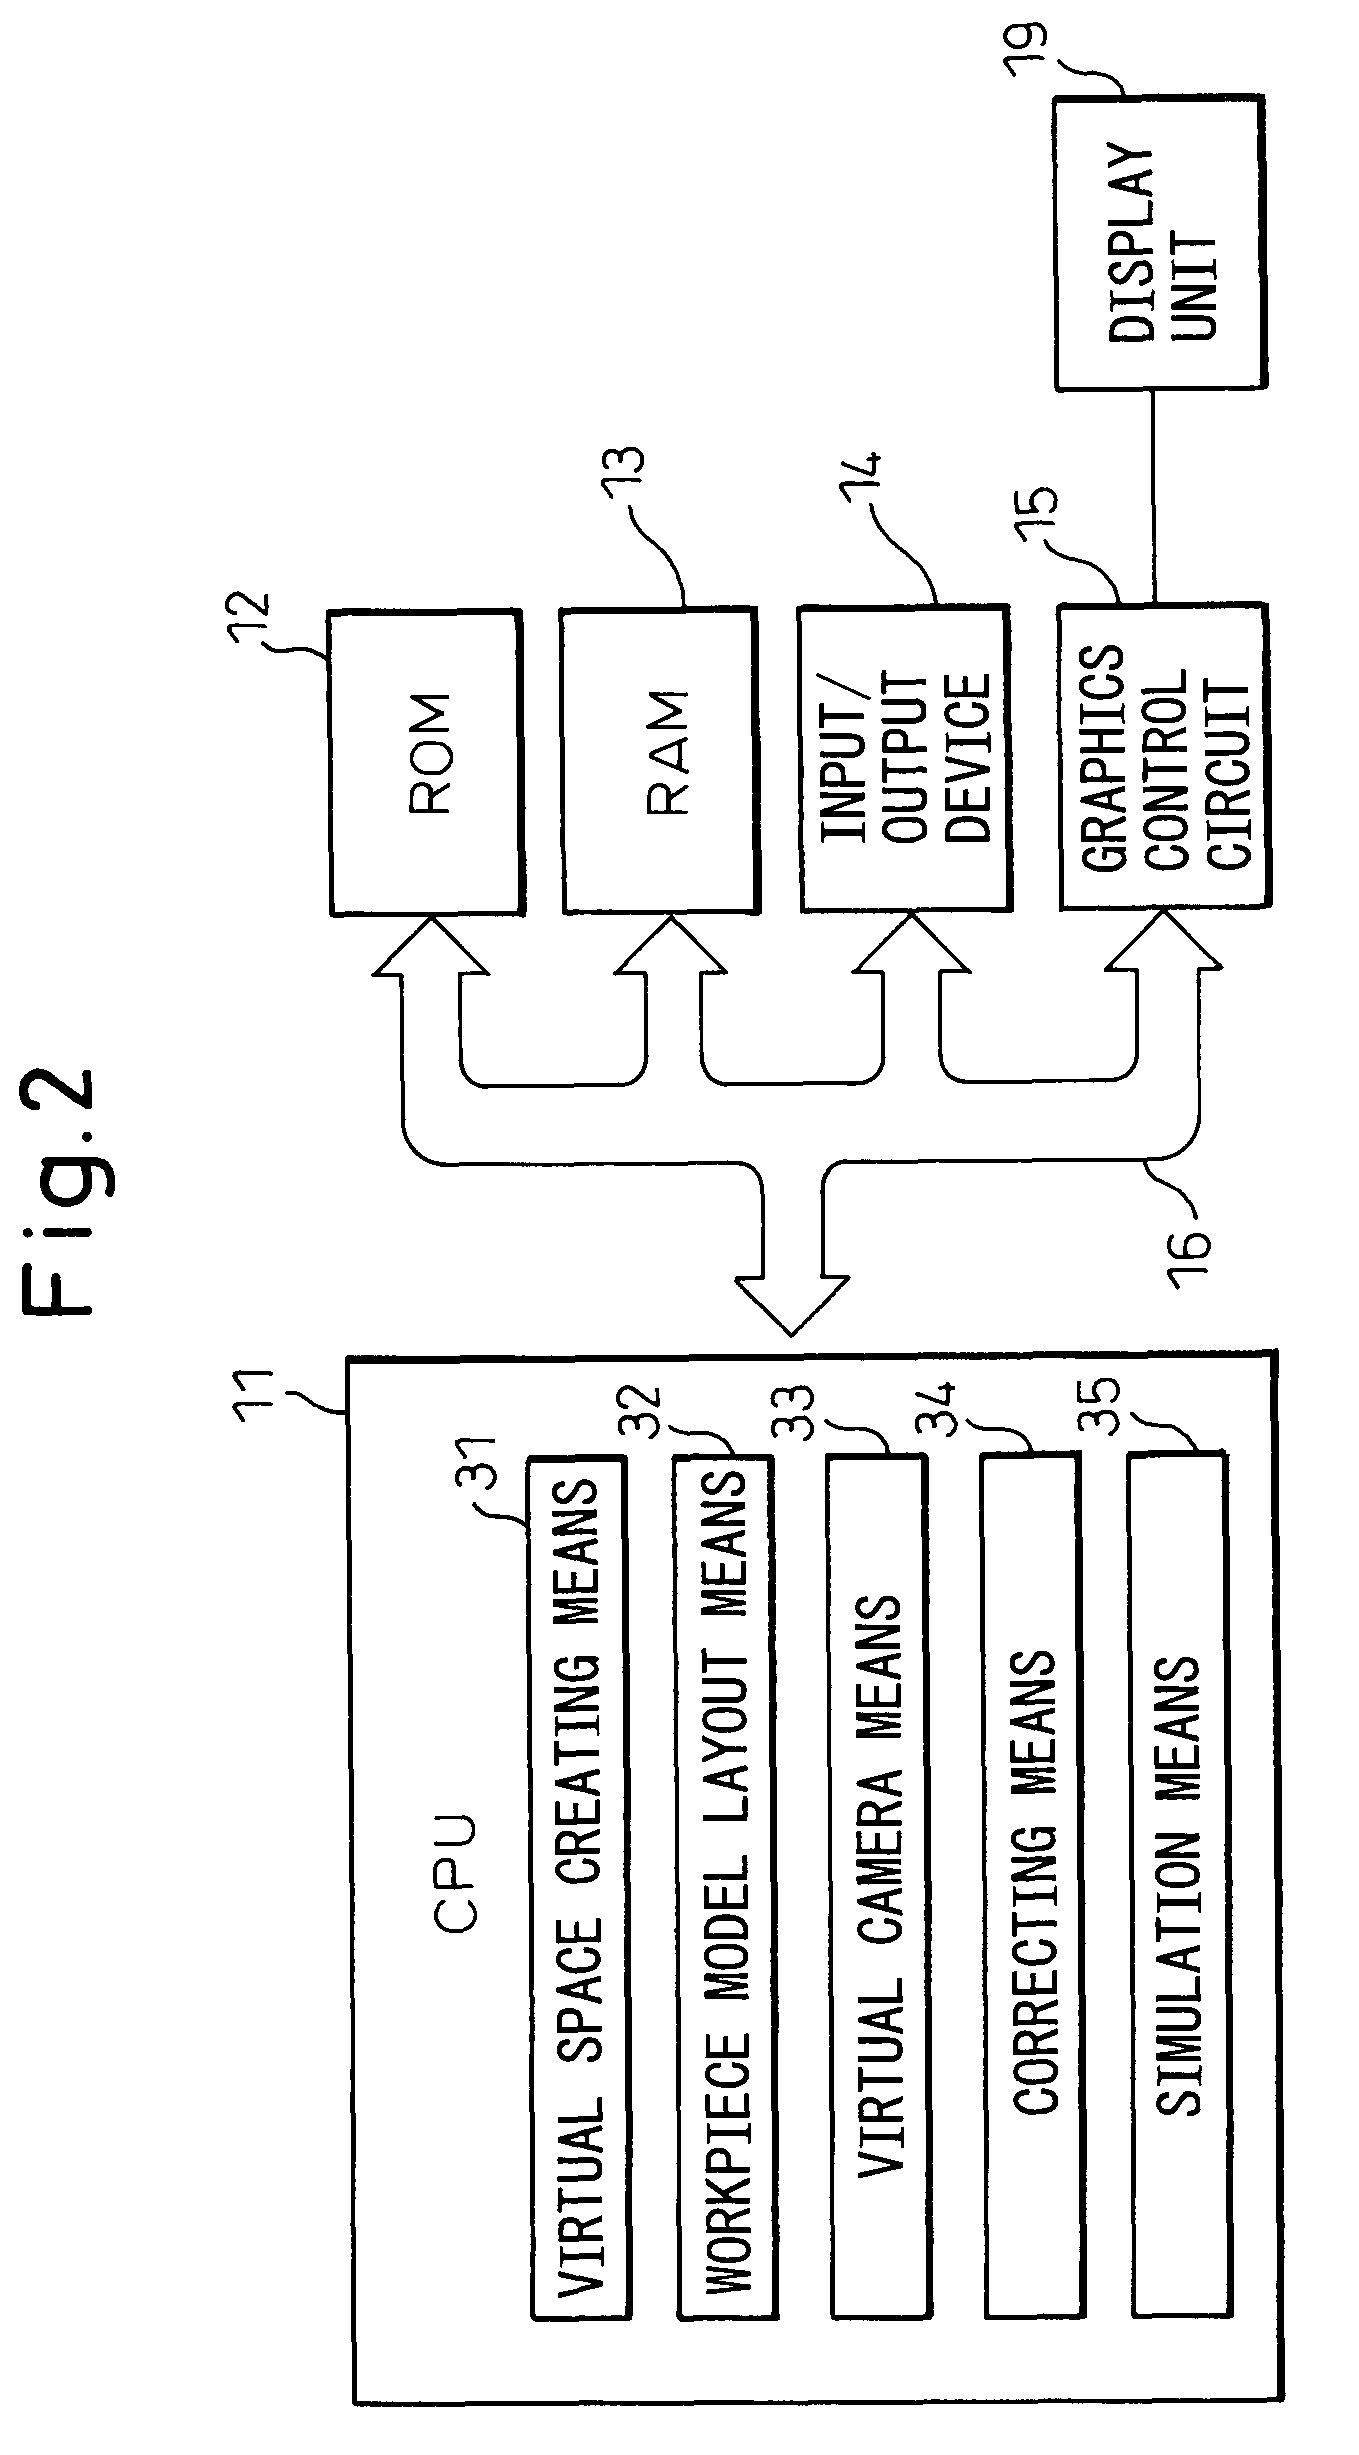 Apparatus simulating operations between a robot and workpiece models